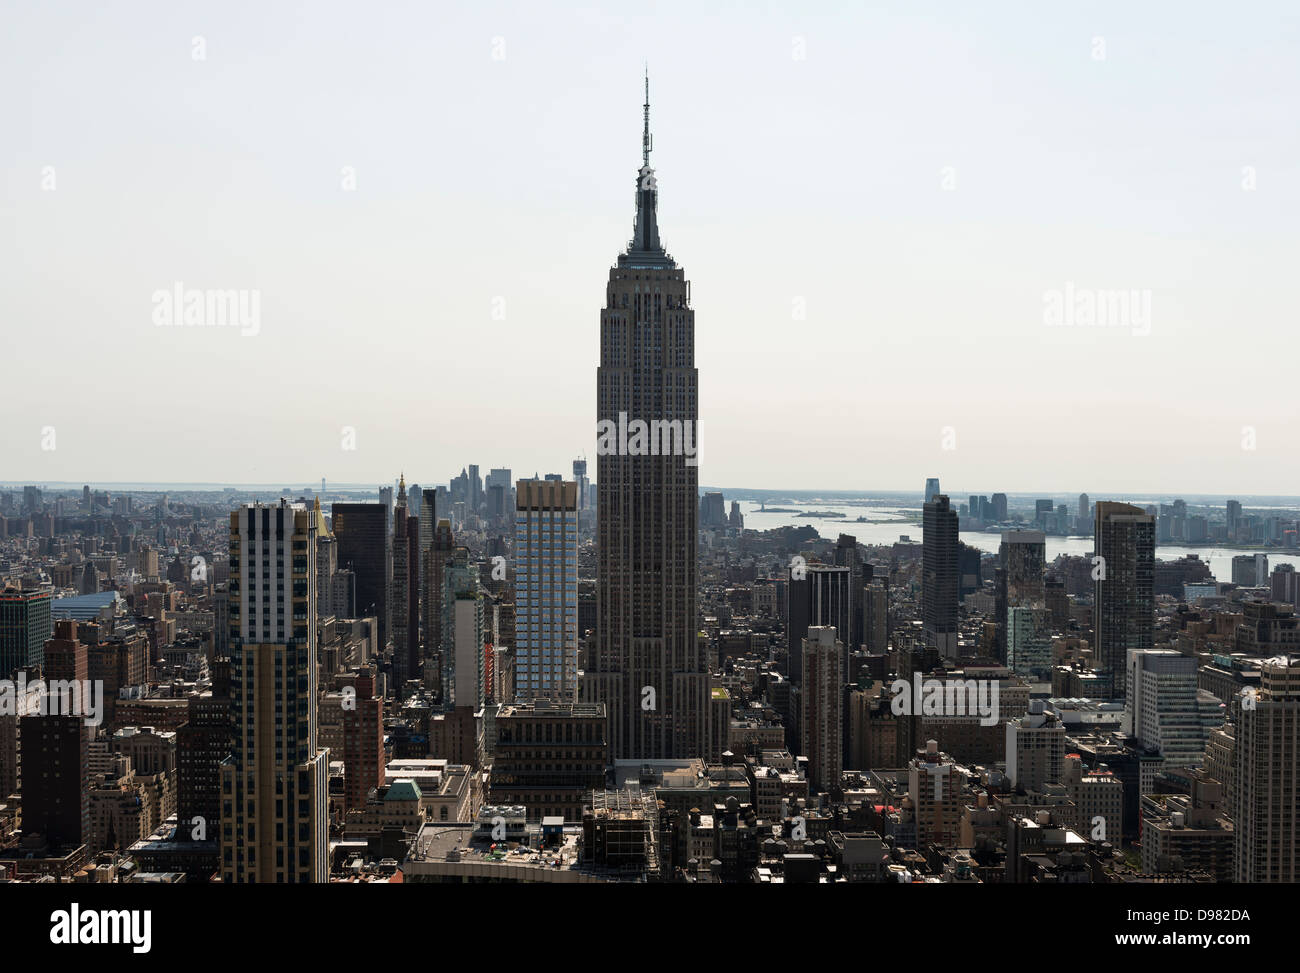 New York Skyline with the Empire State Building Stock Photo